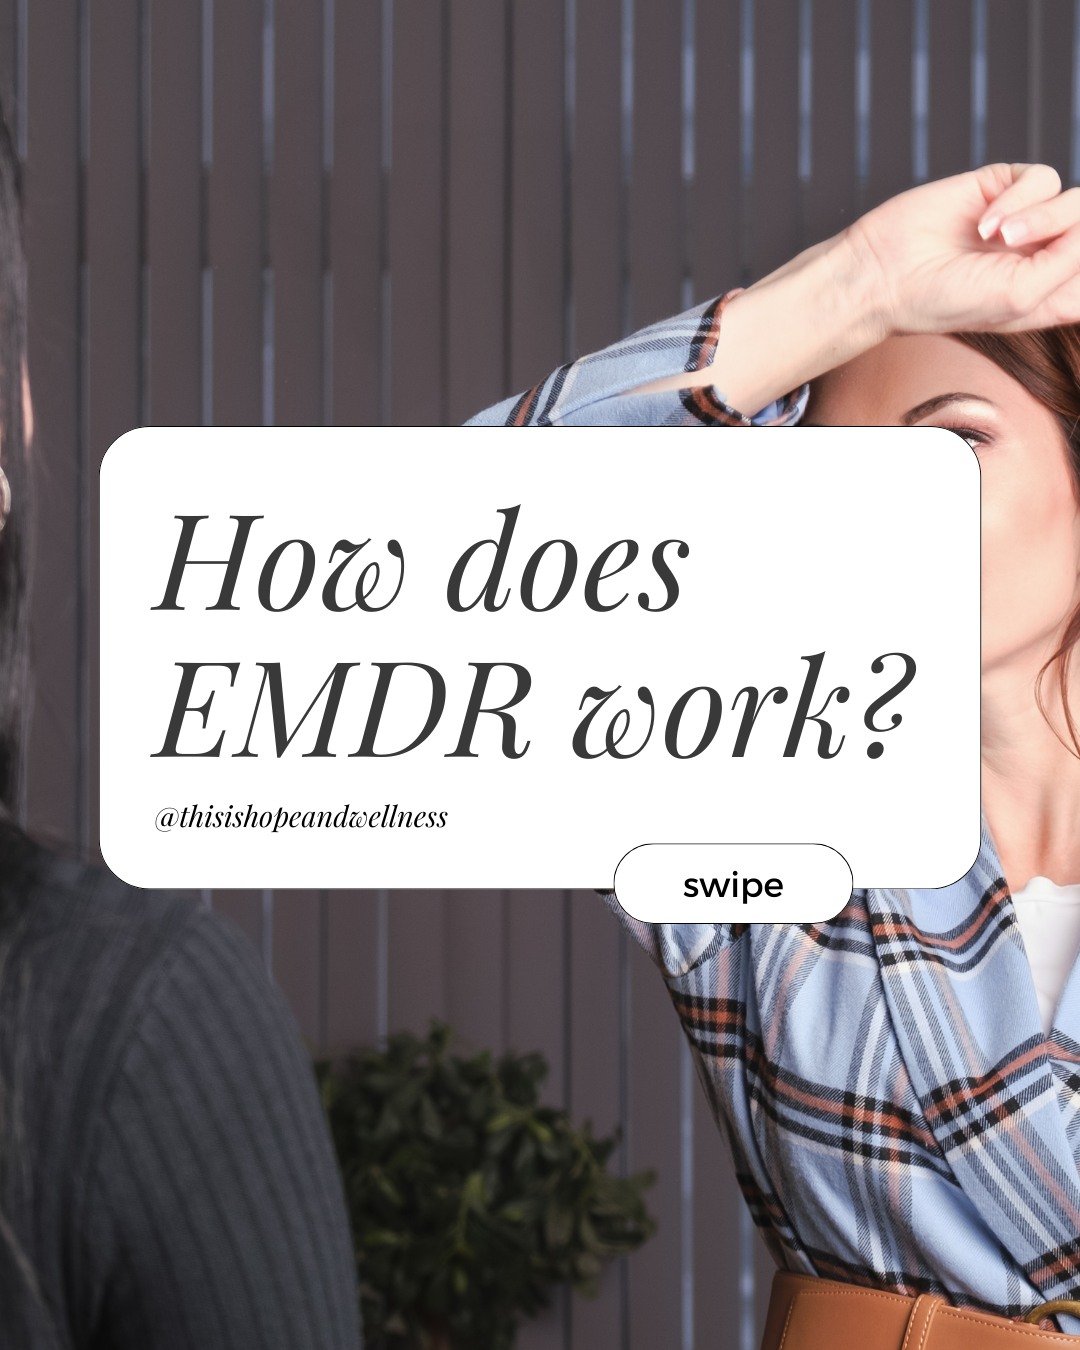 EMDR stands for Eye Movement Desensitization and Reprocessing. It&rsquo;s a kind of psychotherapy that was developed in the 1980s by Francine Shapiro. Dr. Shapiro was walking outdoors in 1987 when she noticed that the distress she was feeling, relate